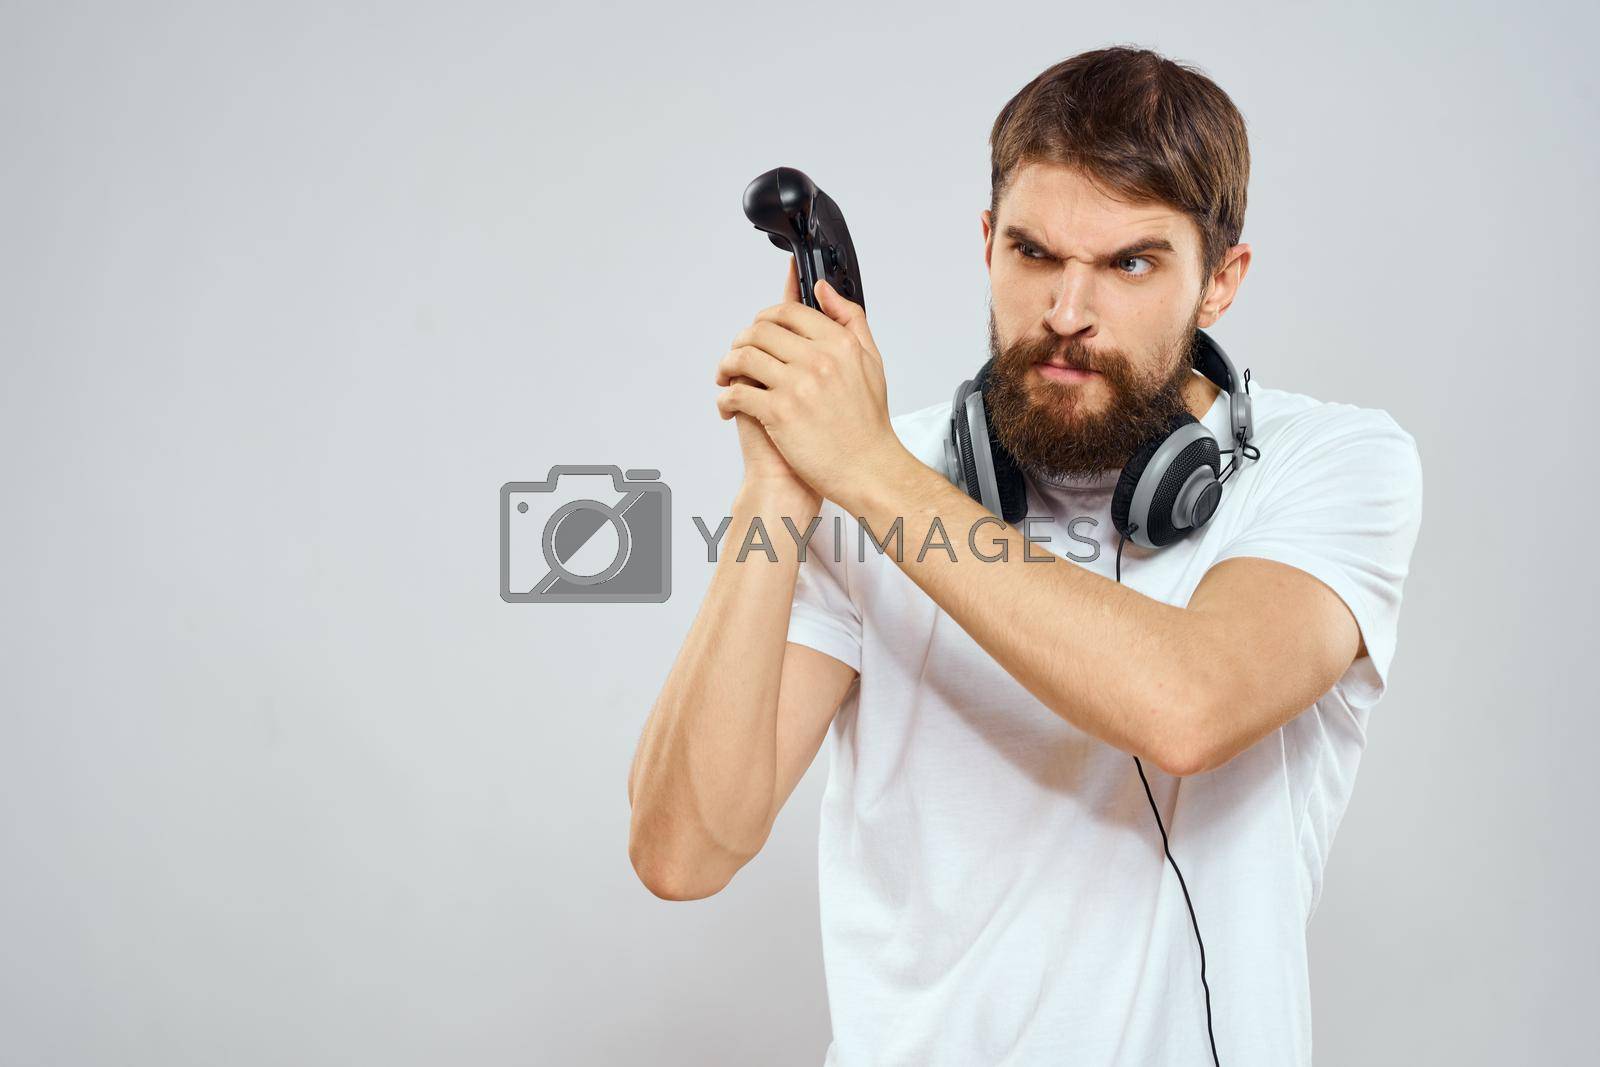 Man with headphones Joystick in hands playing technology lifestyle. High quality photo